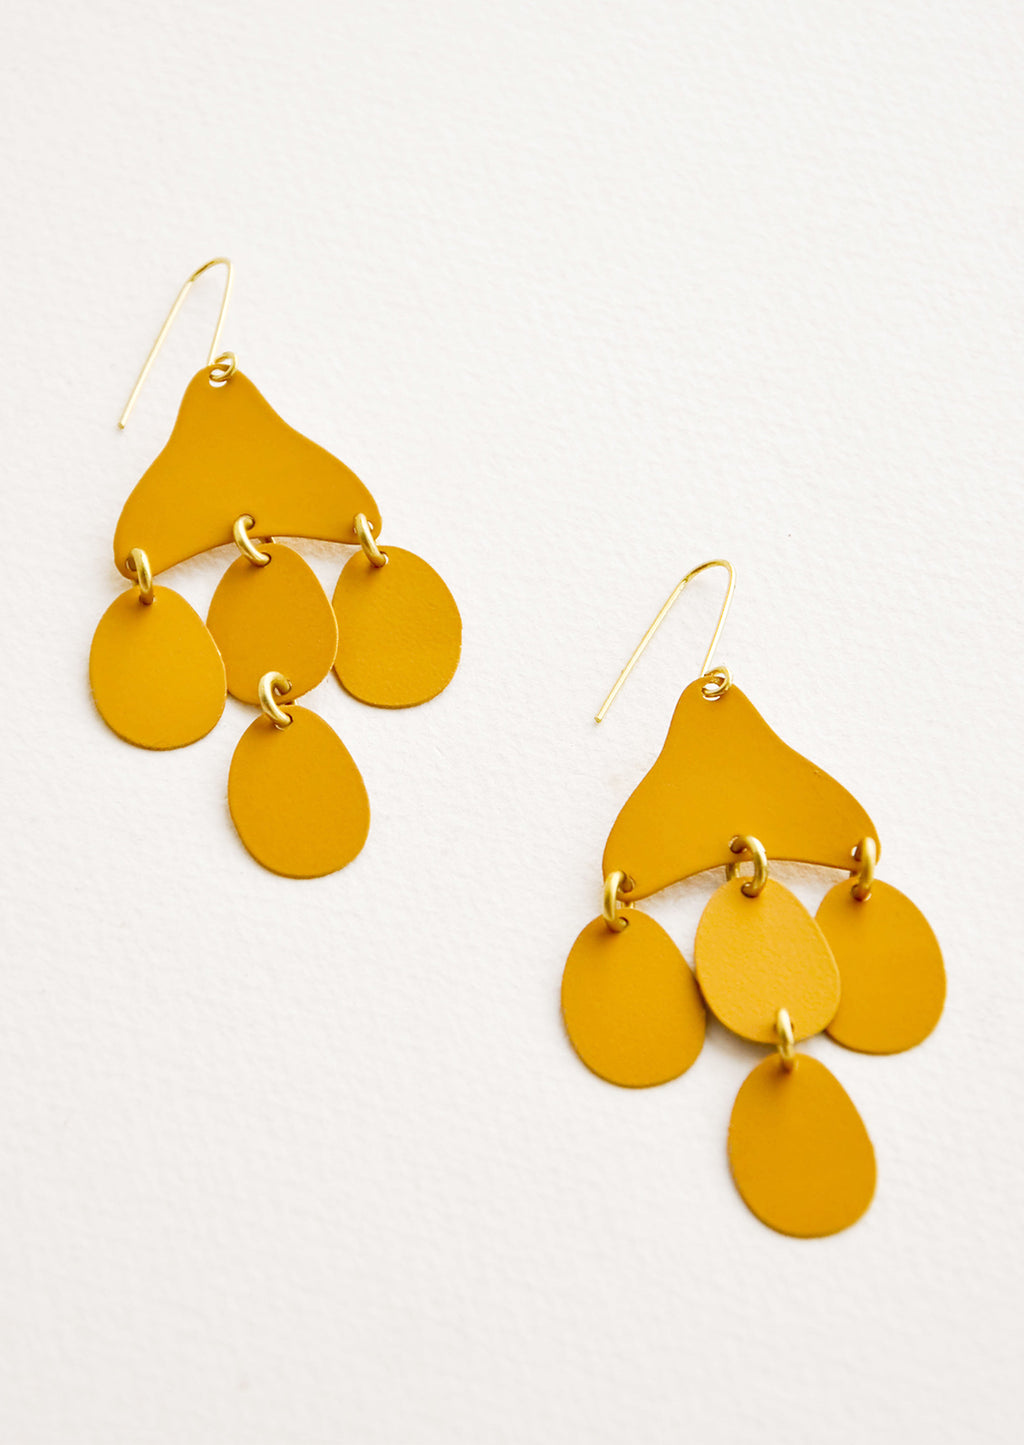 Saffron: Dangling earrings featuring 4 oval shape charms in matte dark yellow metal hanging from an asymmetric triangle in the same color.